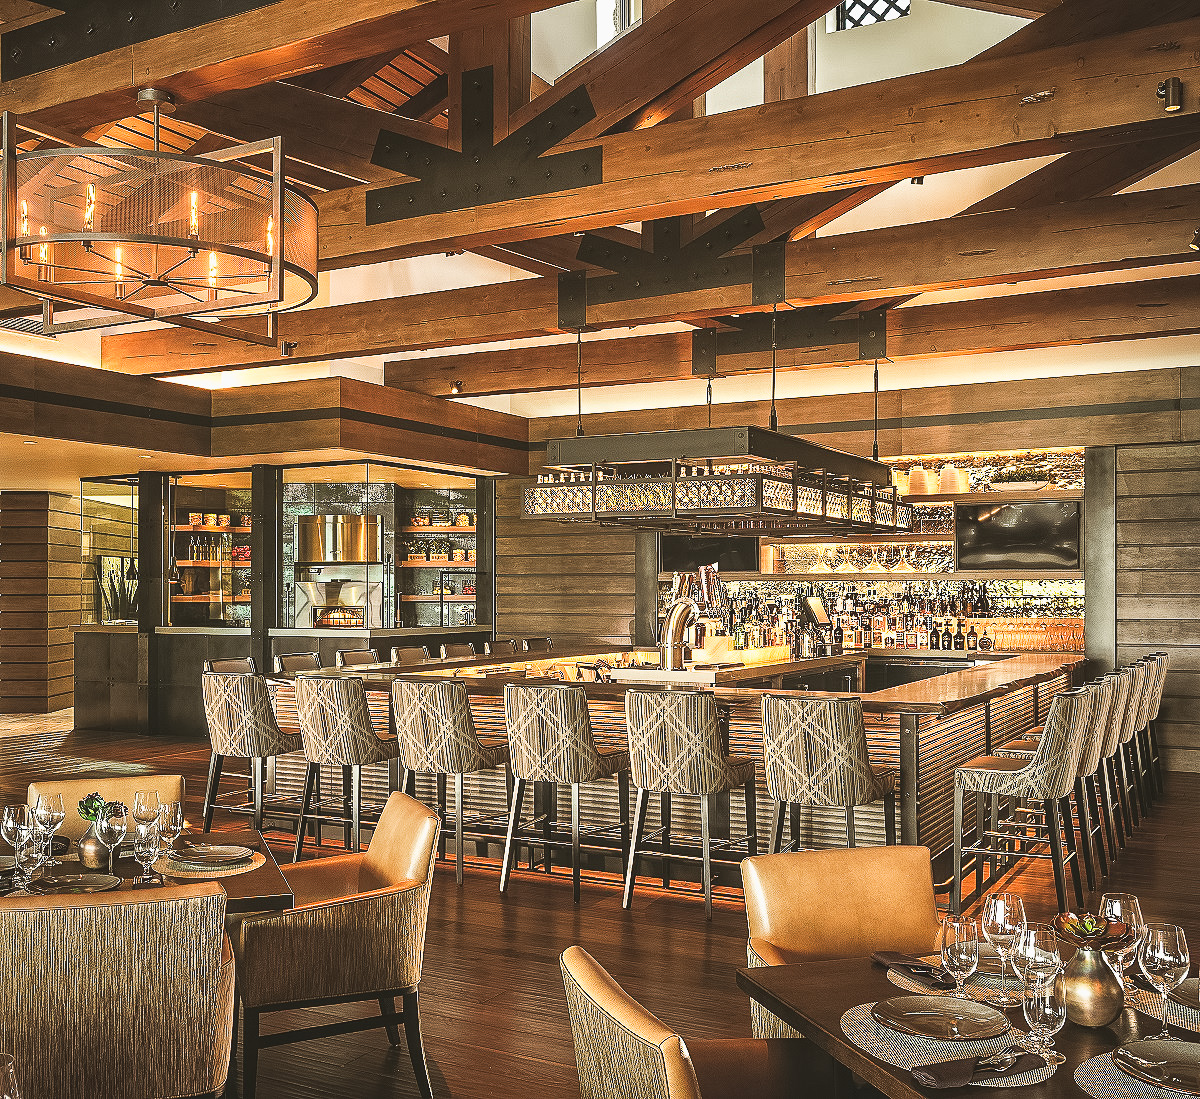 Bar at Ranch House Grill & Brewery (Photo courtesy of Robson Resort Communities)